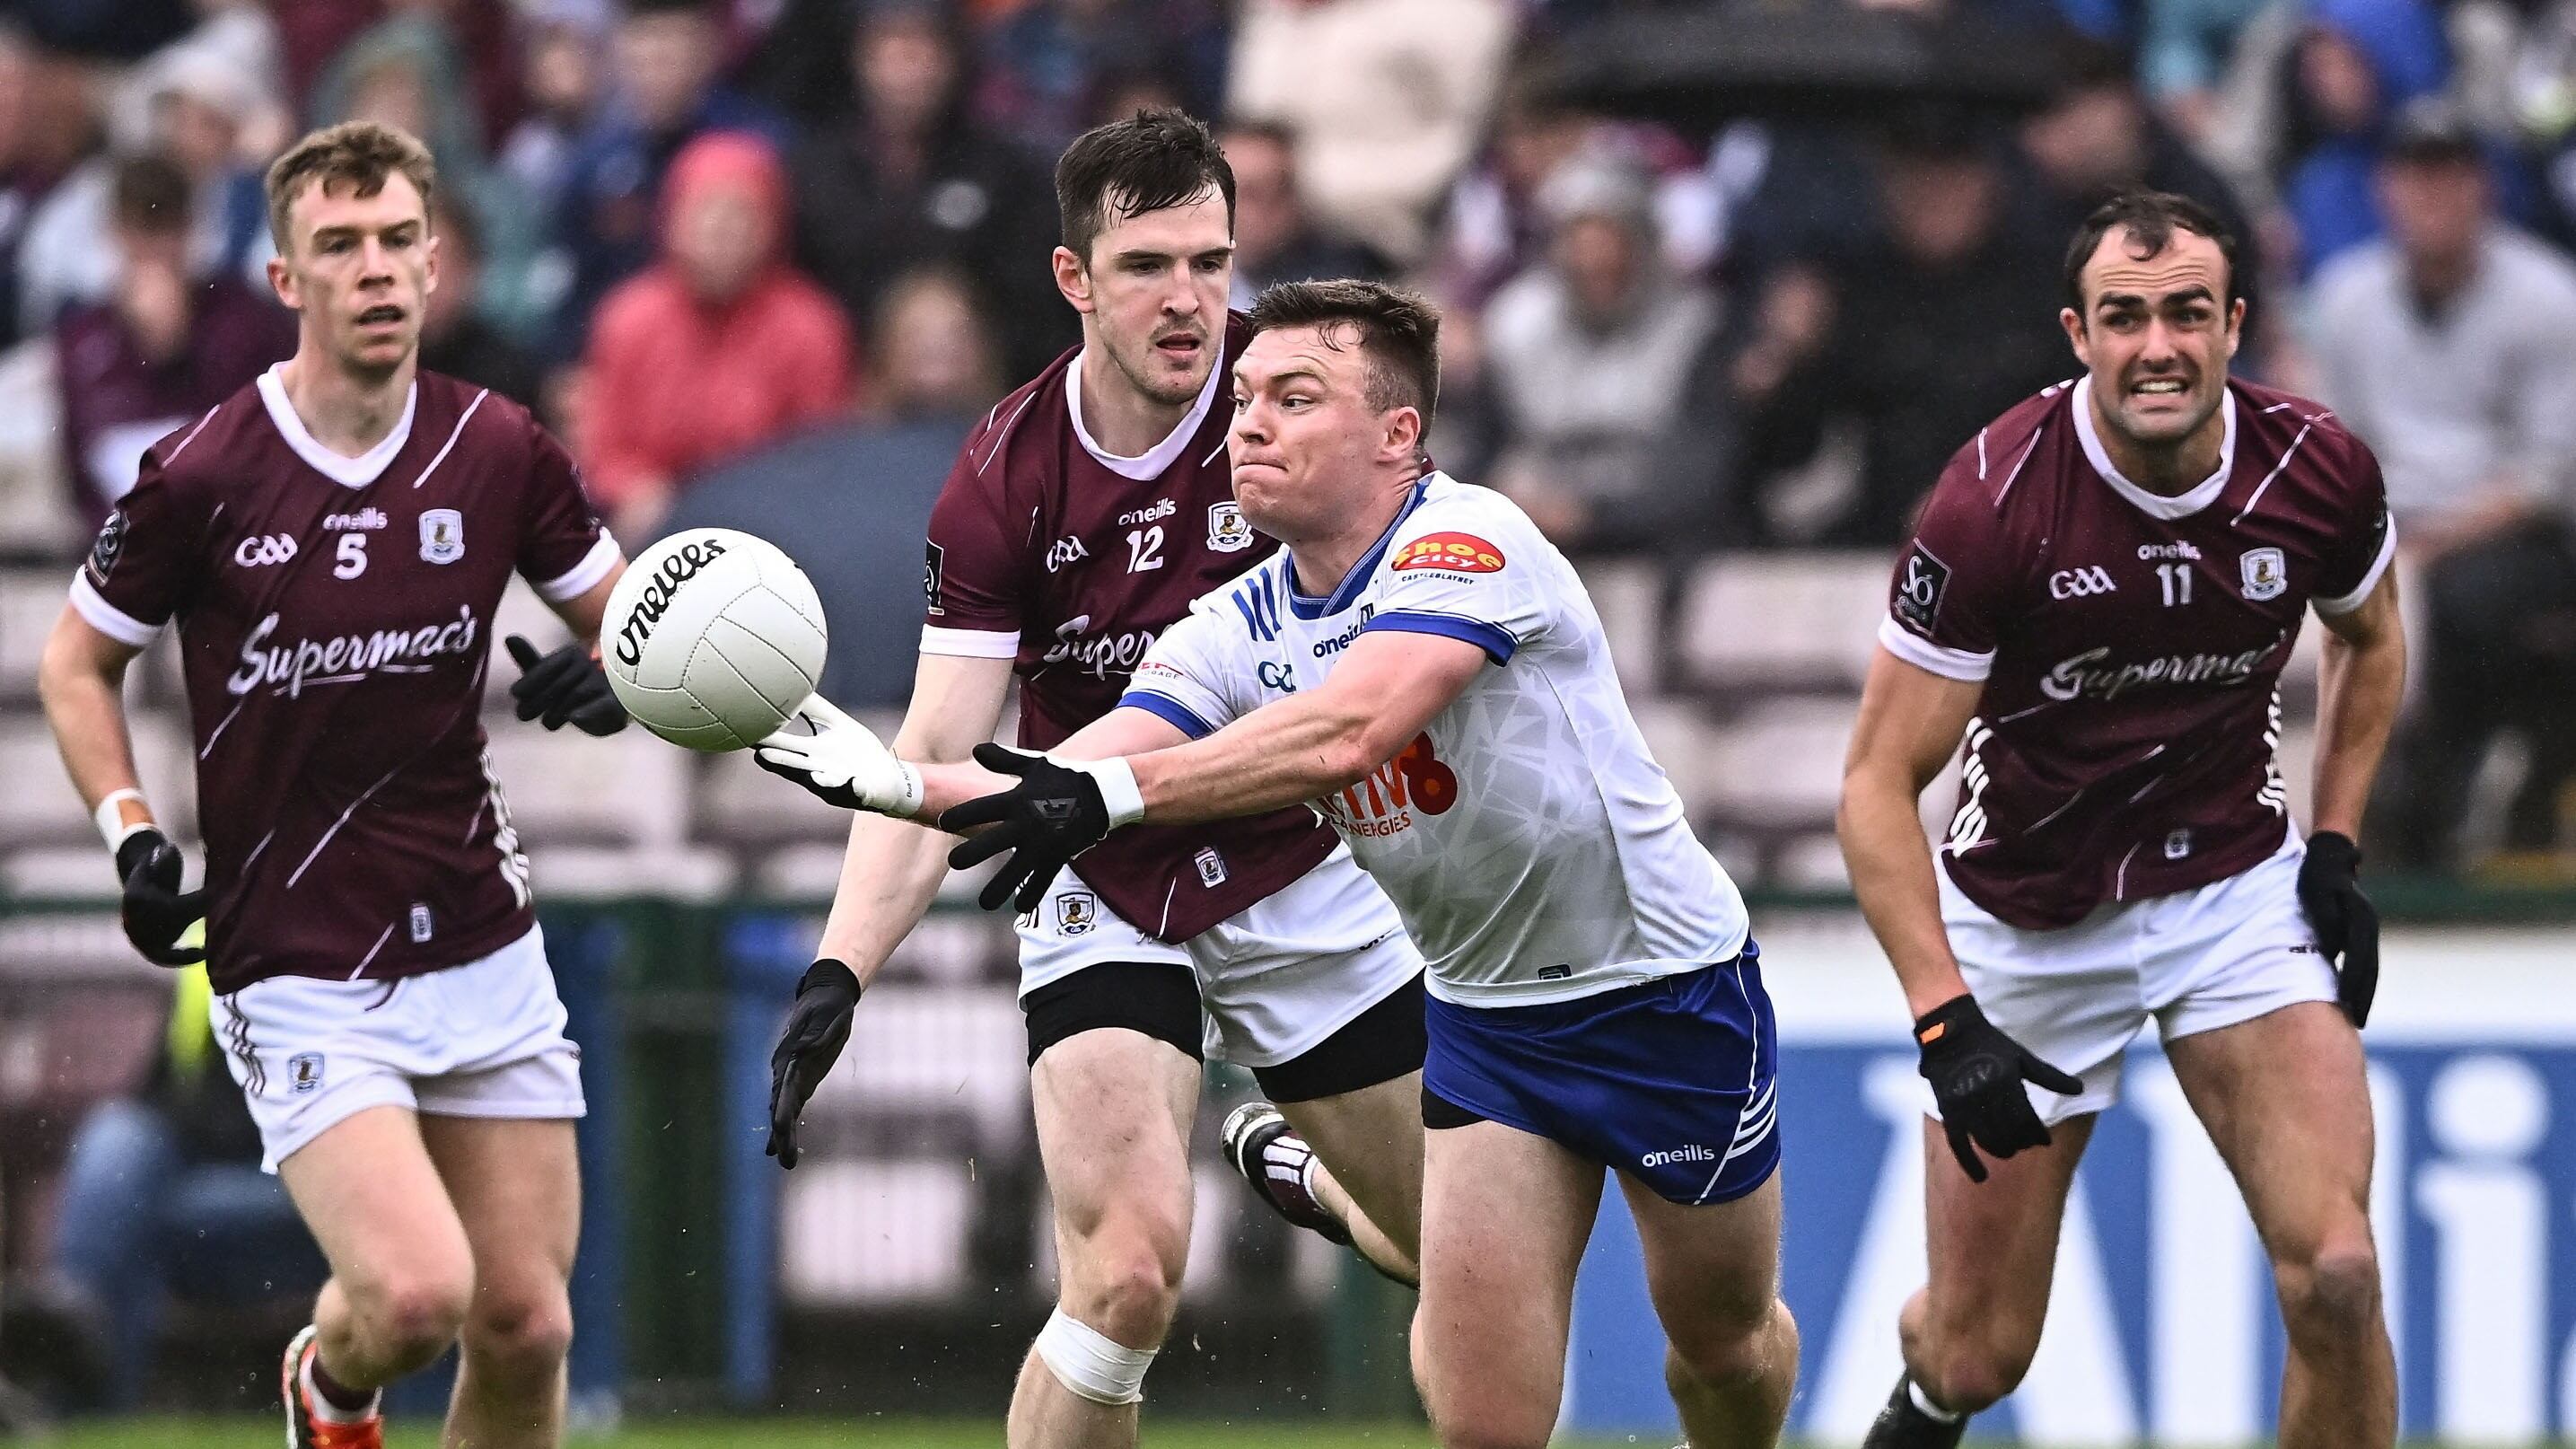 Conor McCarthy played the pass that led to Barry McBennett's piledriver but Galway survived when it cannoned off the crossbar. Picture: Sportsfile